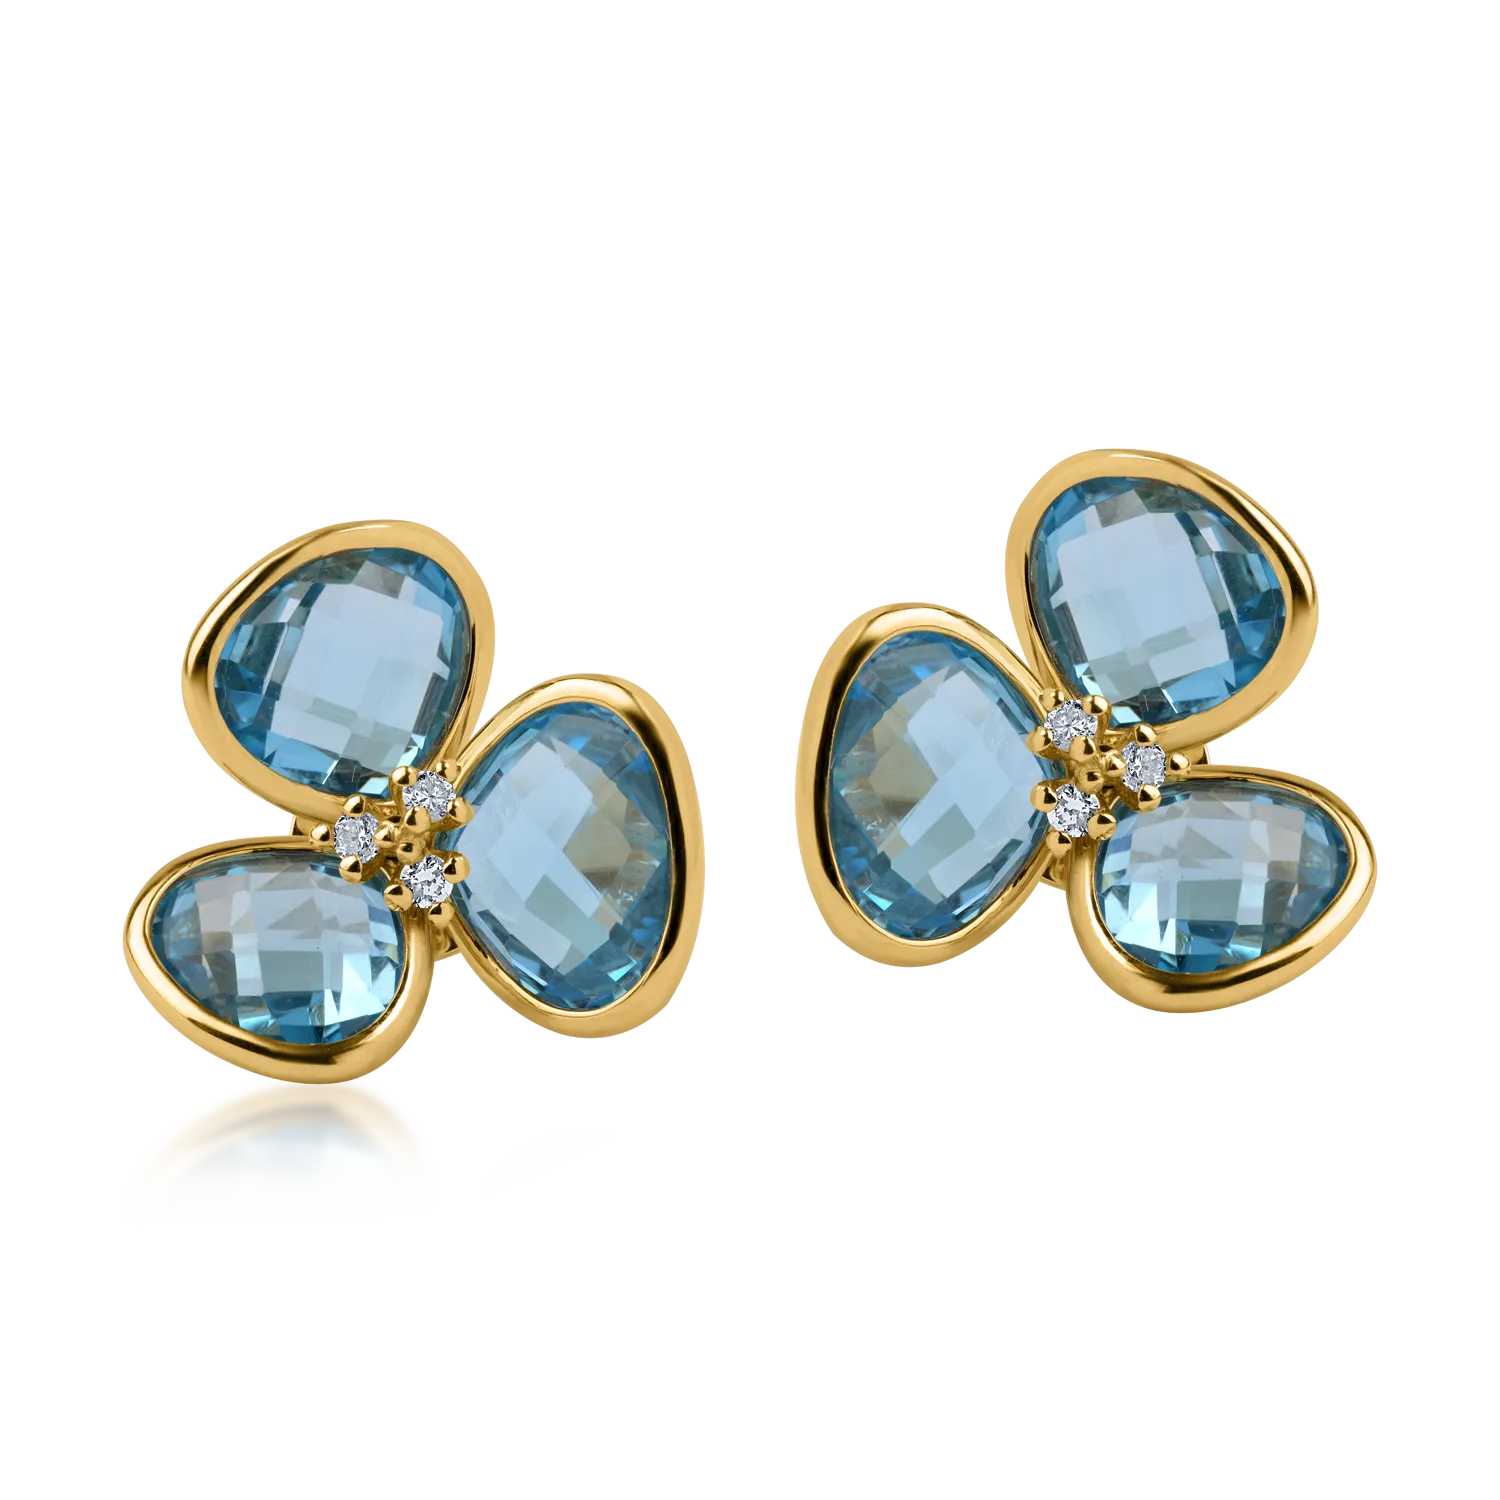 Yellow gold flower earrings with 10.3ct blue topazes and 0.09ct diamonds